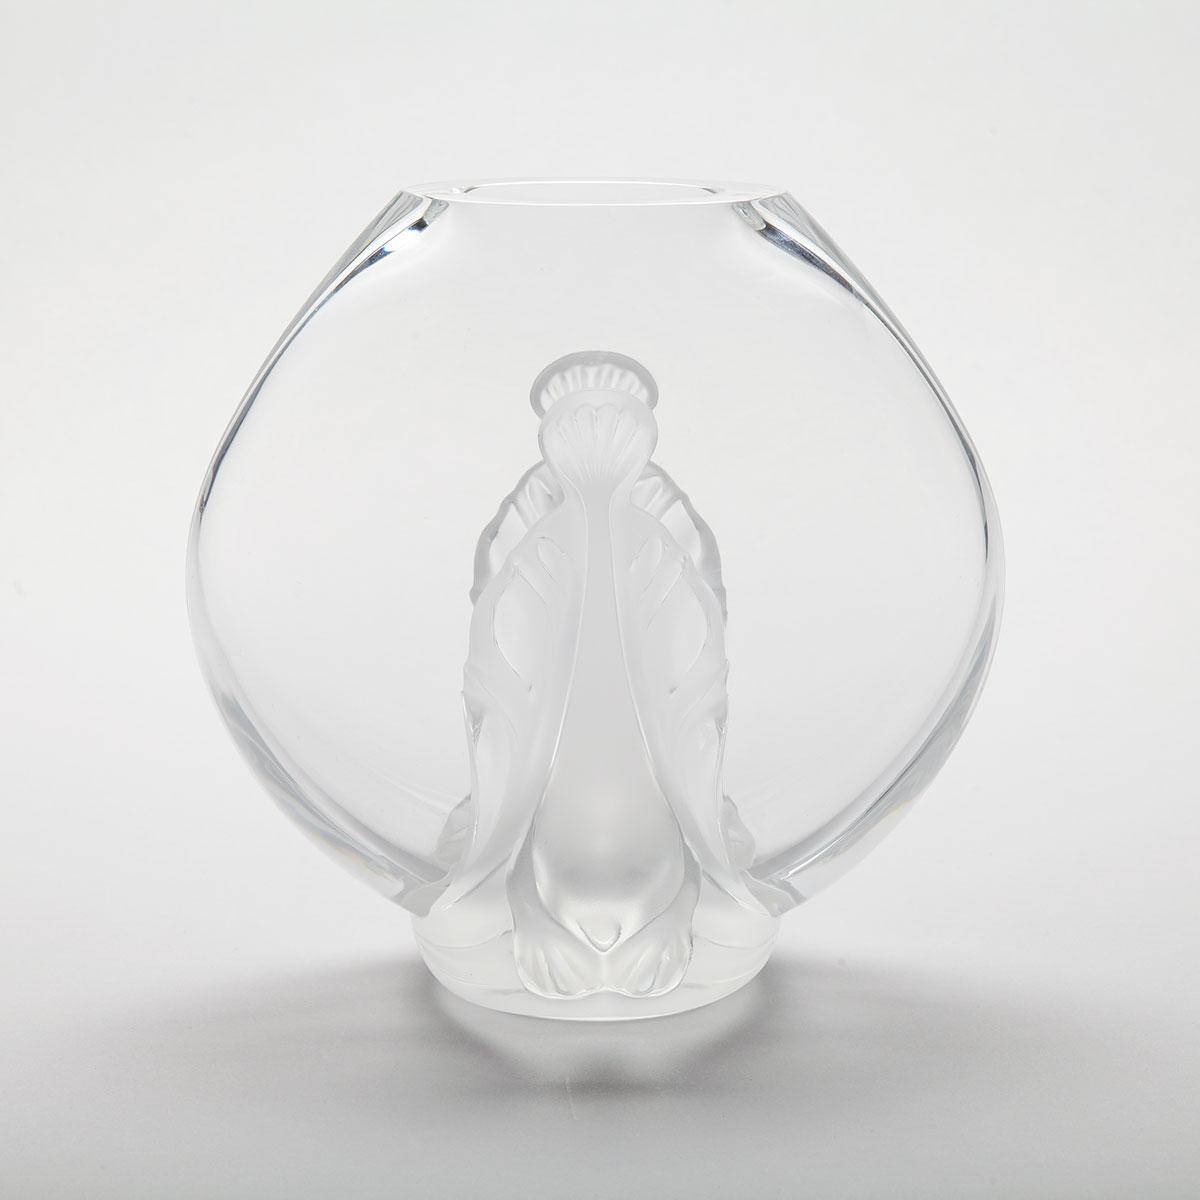 ‘Garance’, Lalique Moulded and Partly Frosted Glass Vase, 20th century